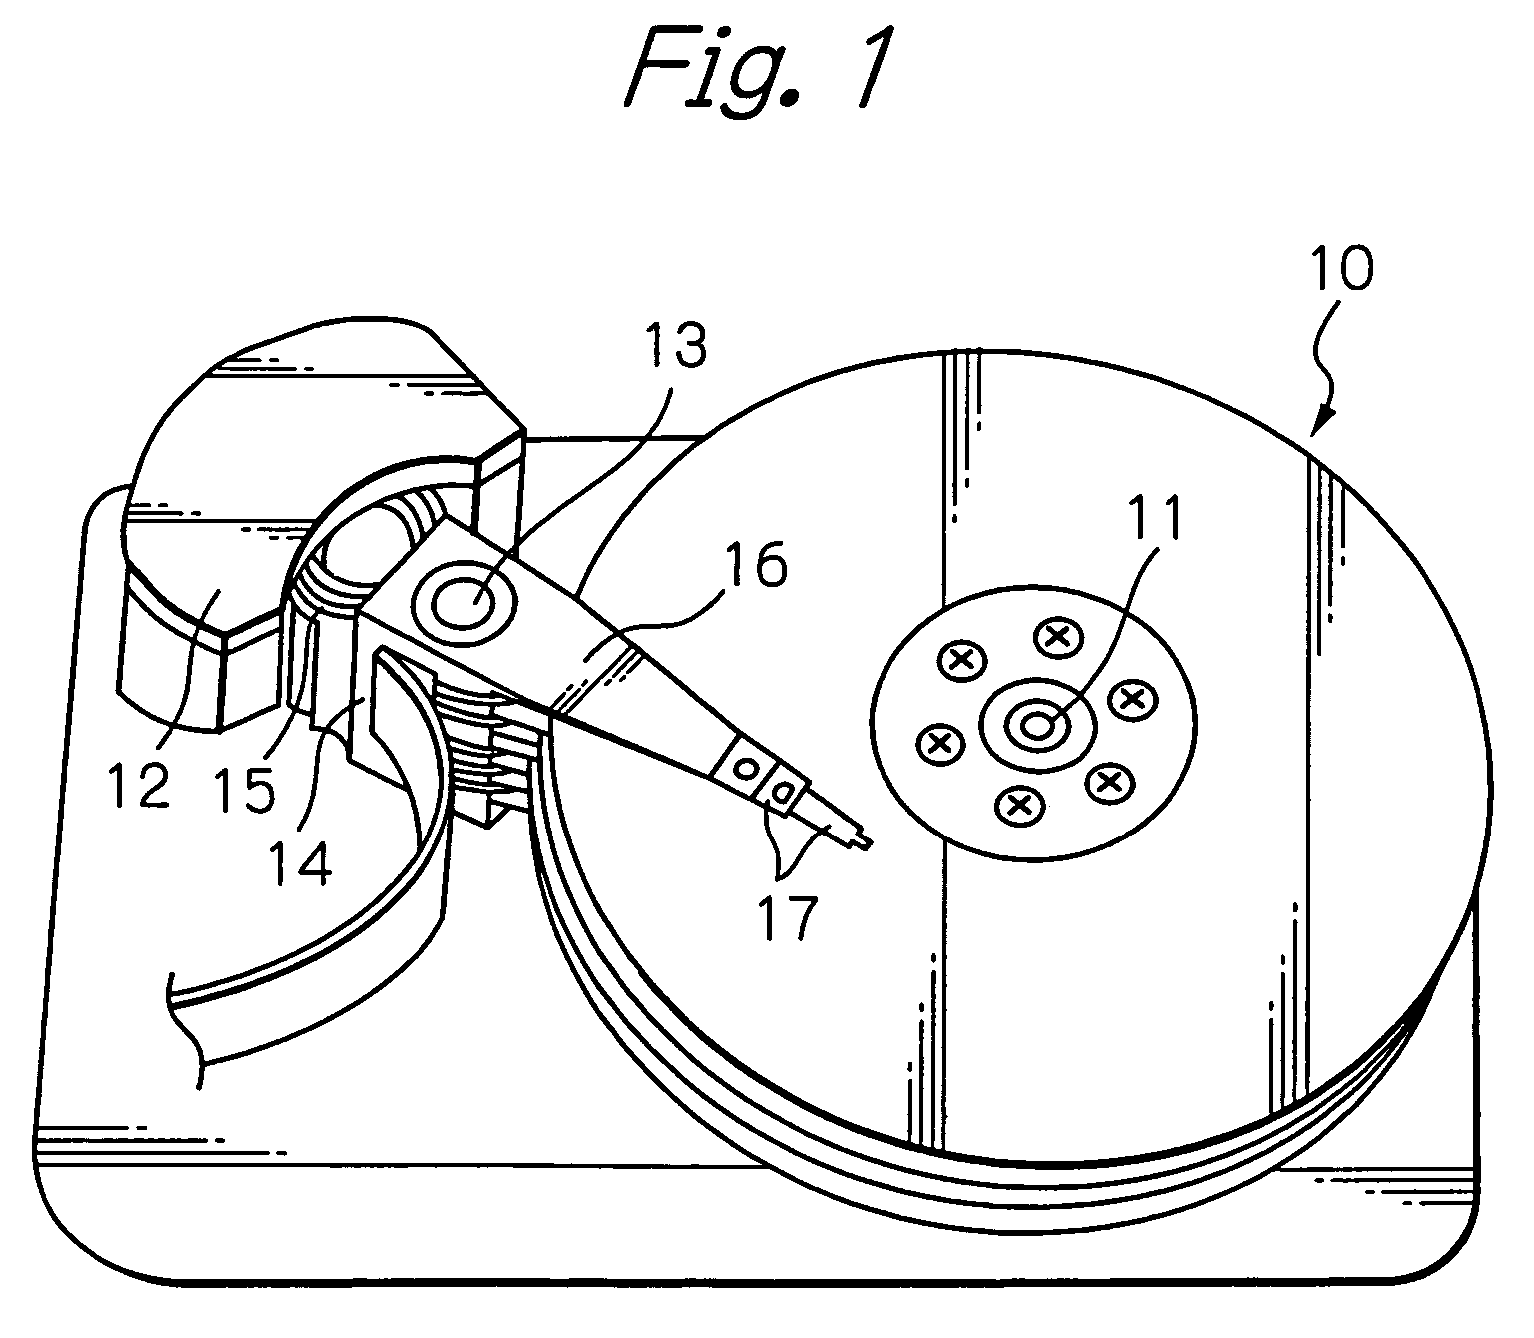 FPC with via holes with filler being welded to suspension and drive apparatus